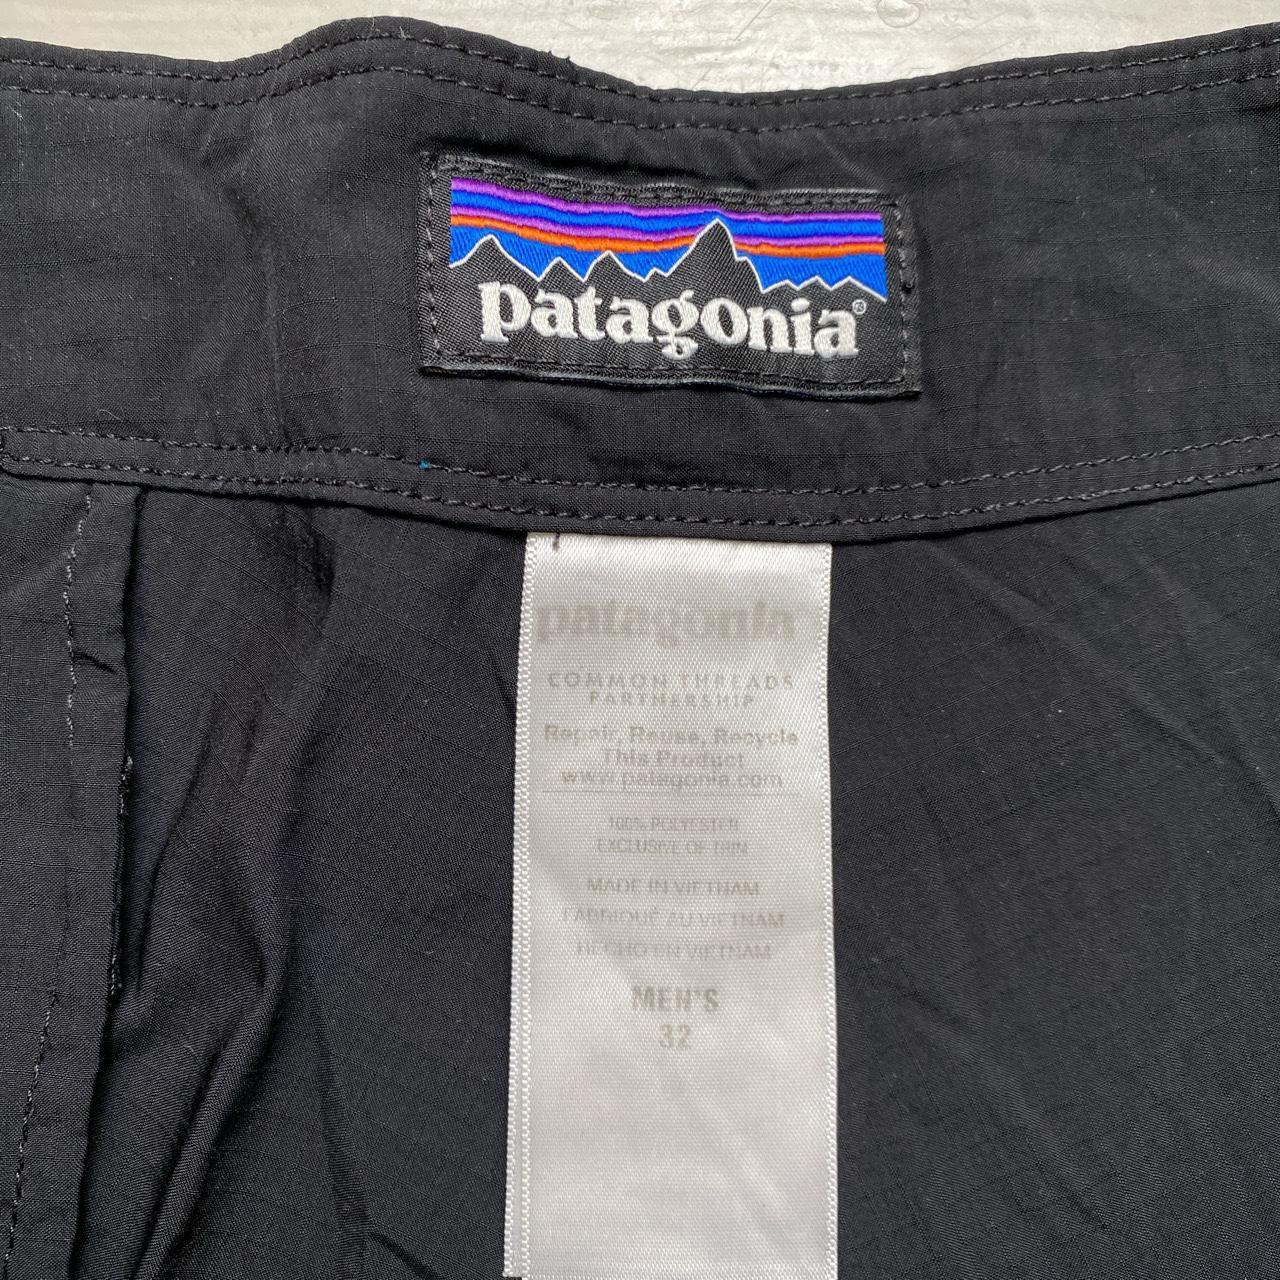 Patagonia Black and Red Shorts